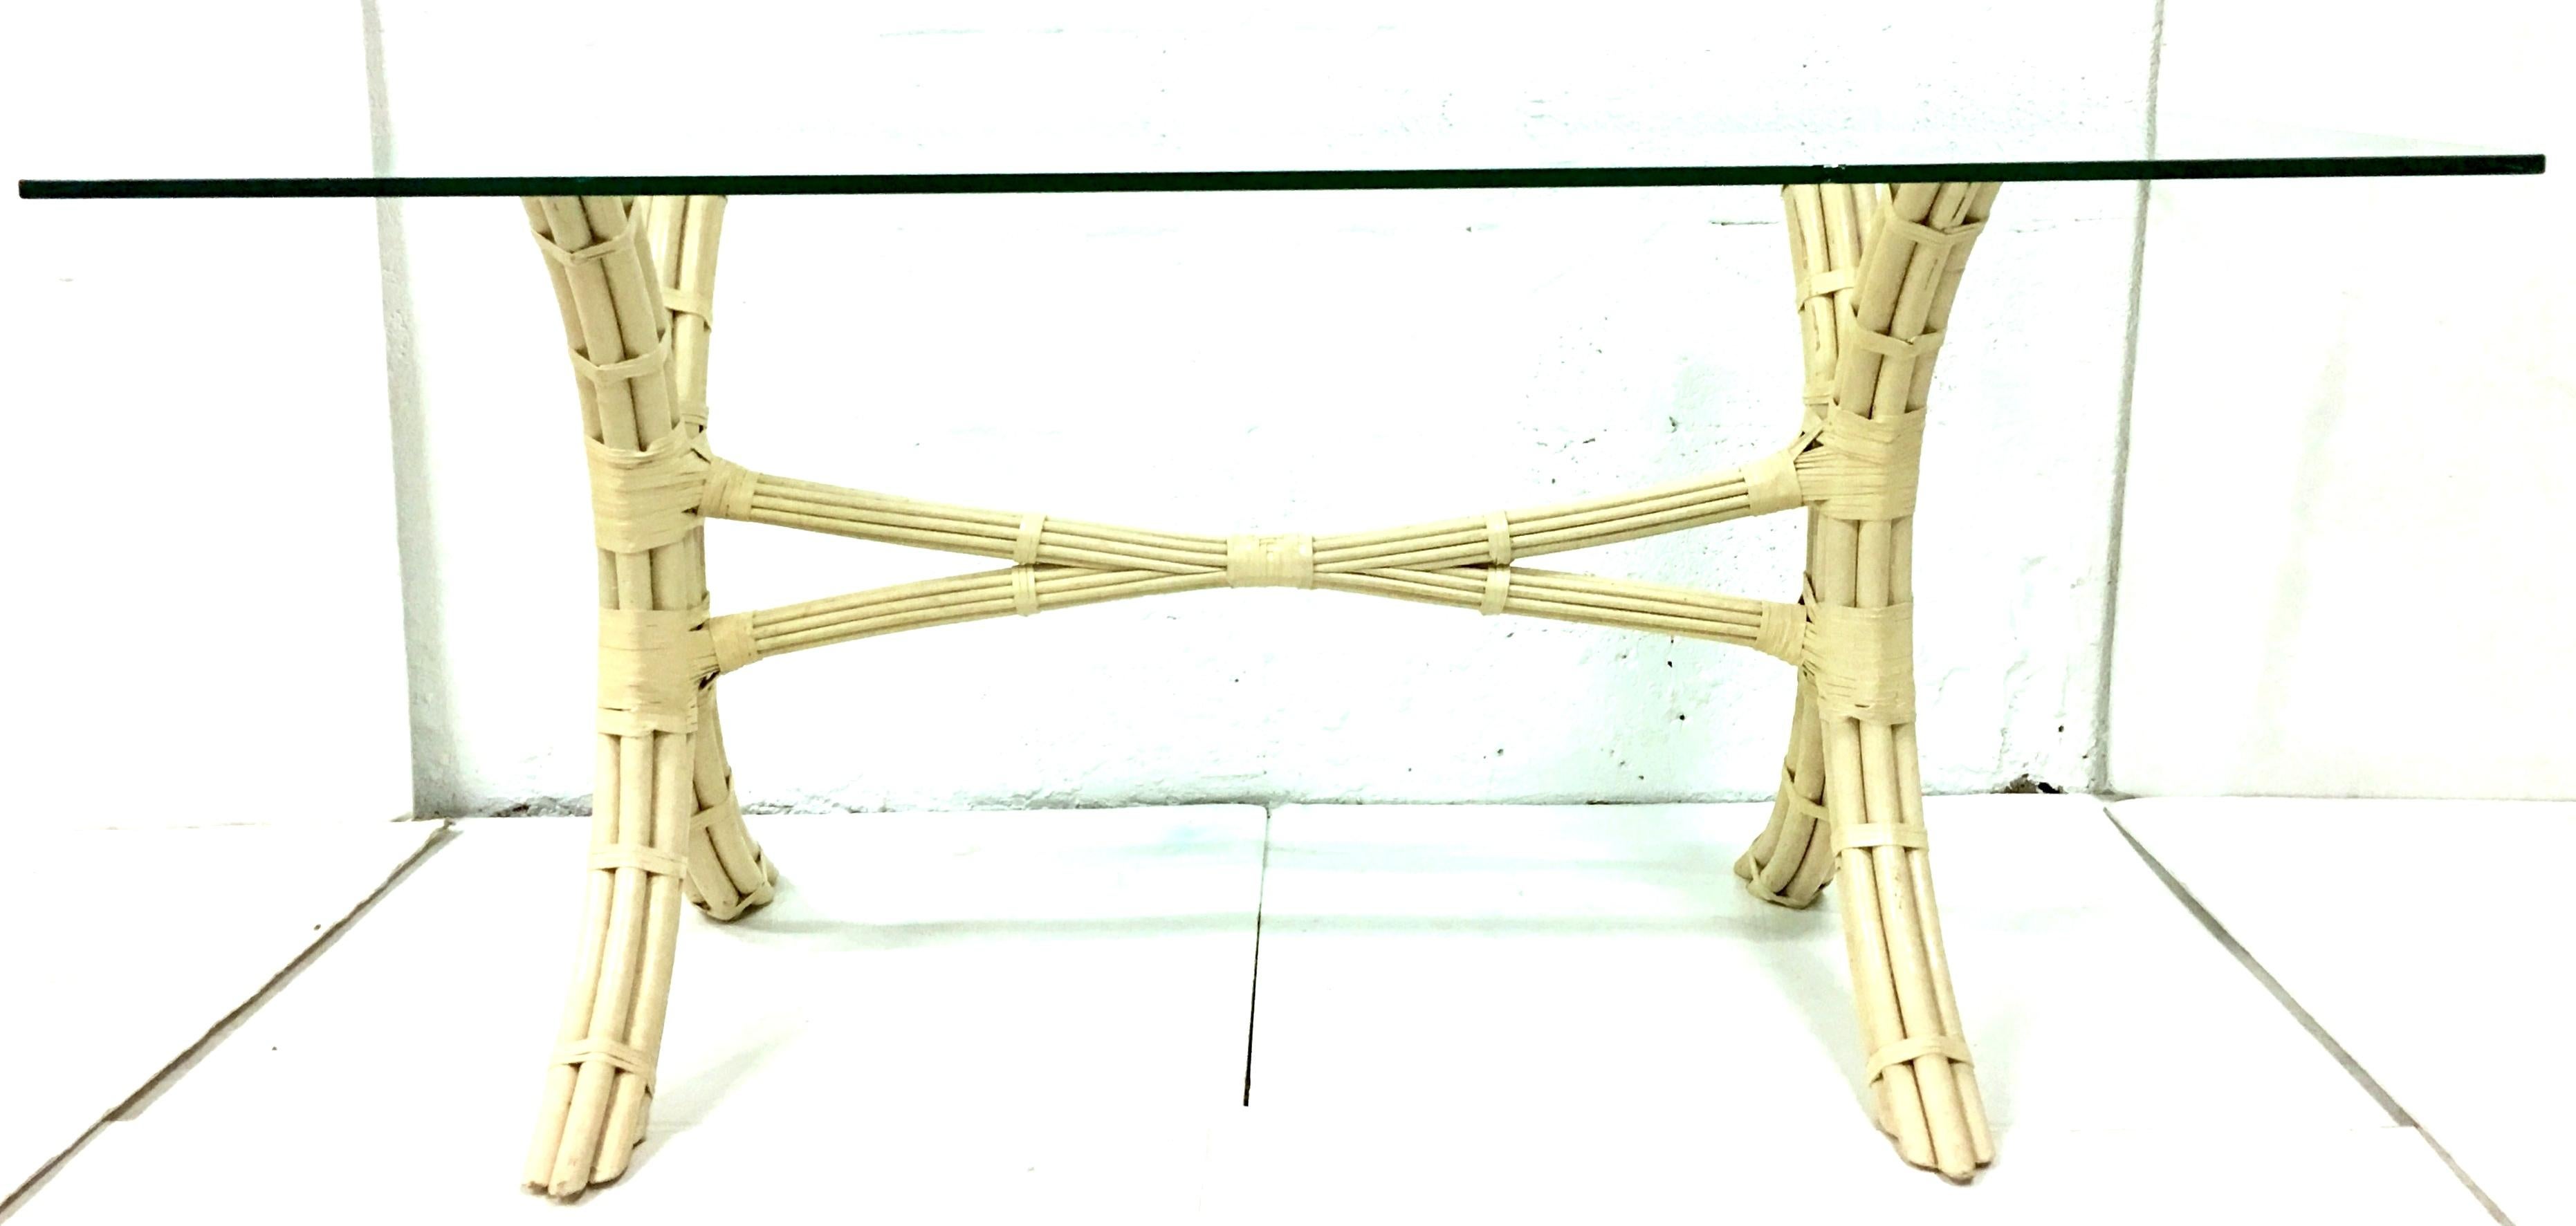 20th Century Bielecky Brothers style rattan and glass top dining table. This large and rectangular rattan reed with raw hide leather wrap detail table is executed in the original and rare manufacturer paint of a neutral bone tone color. The very